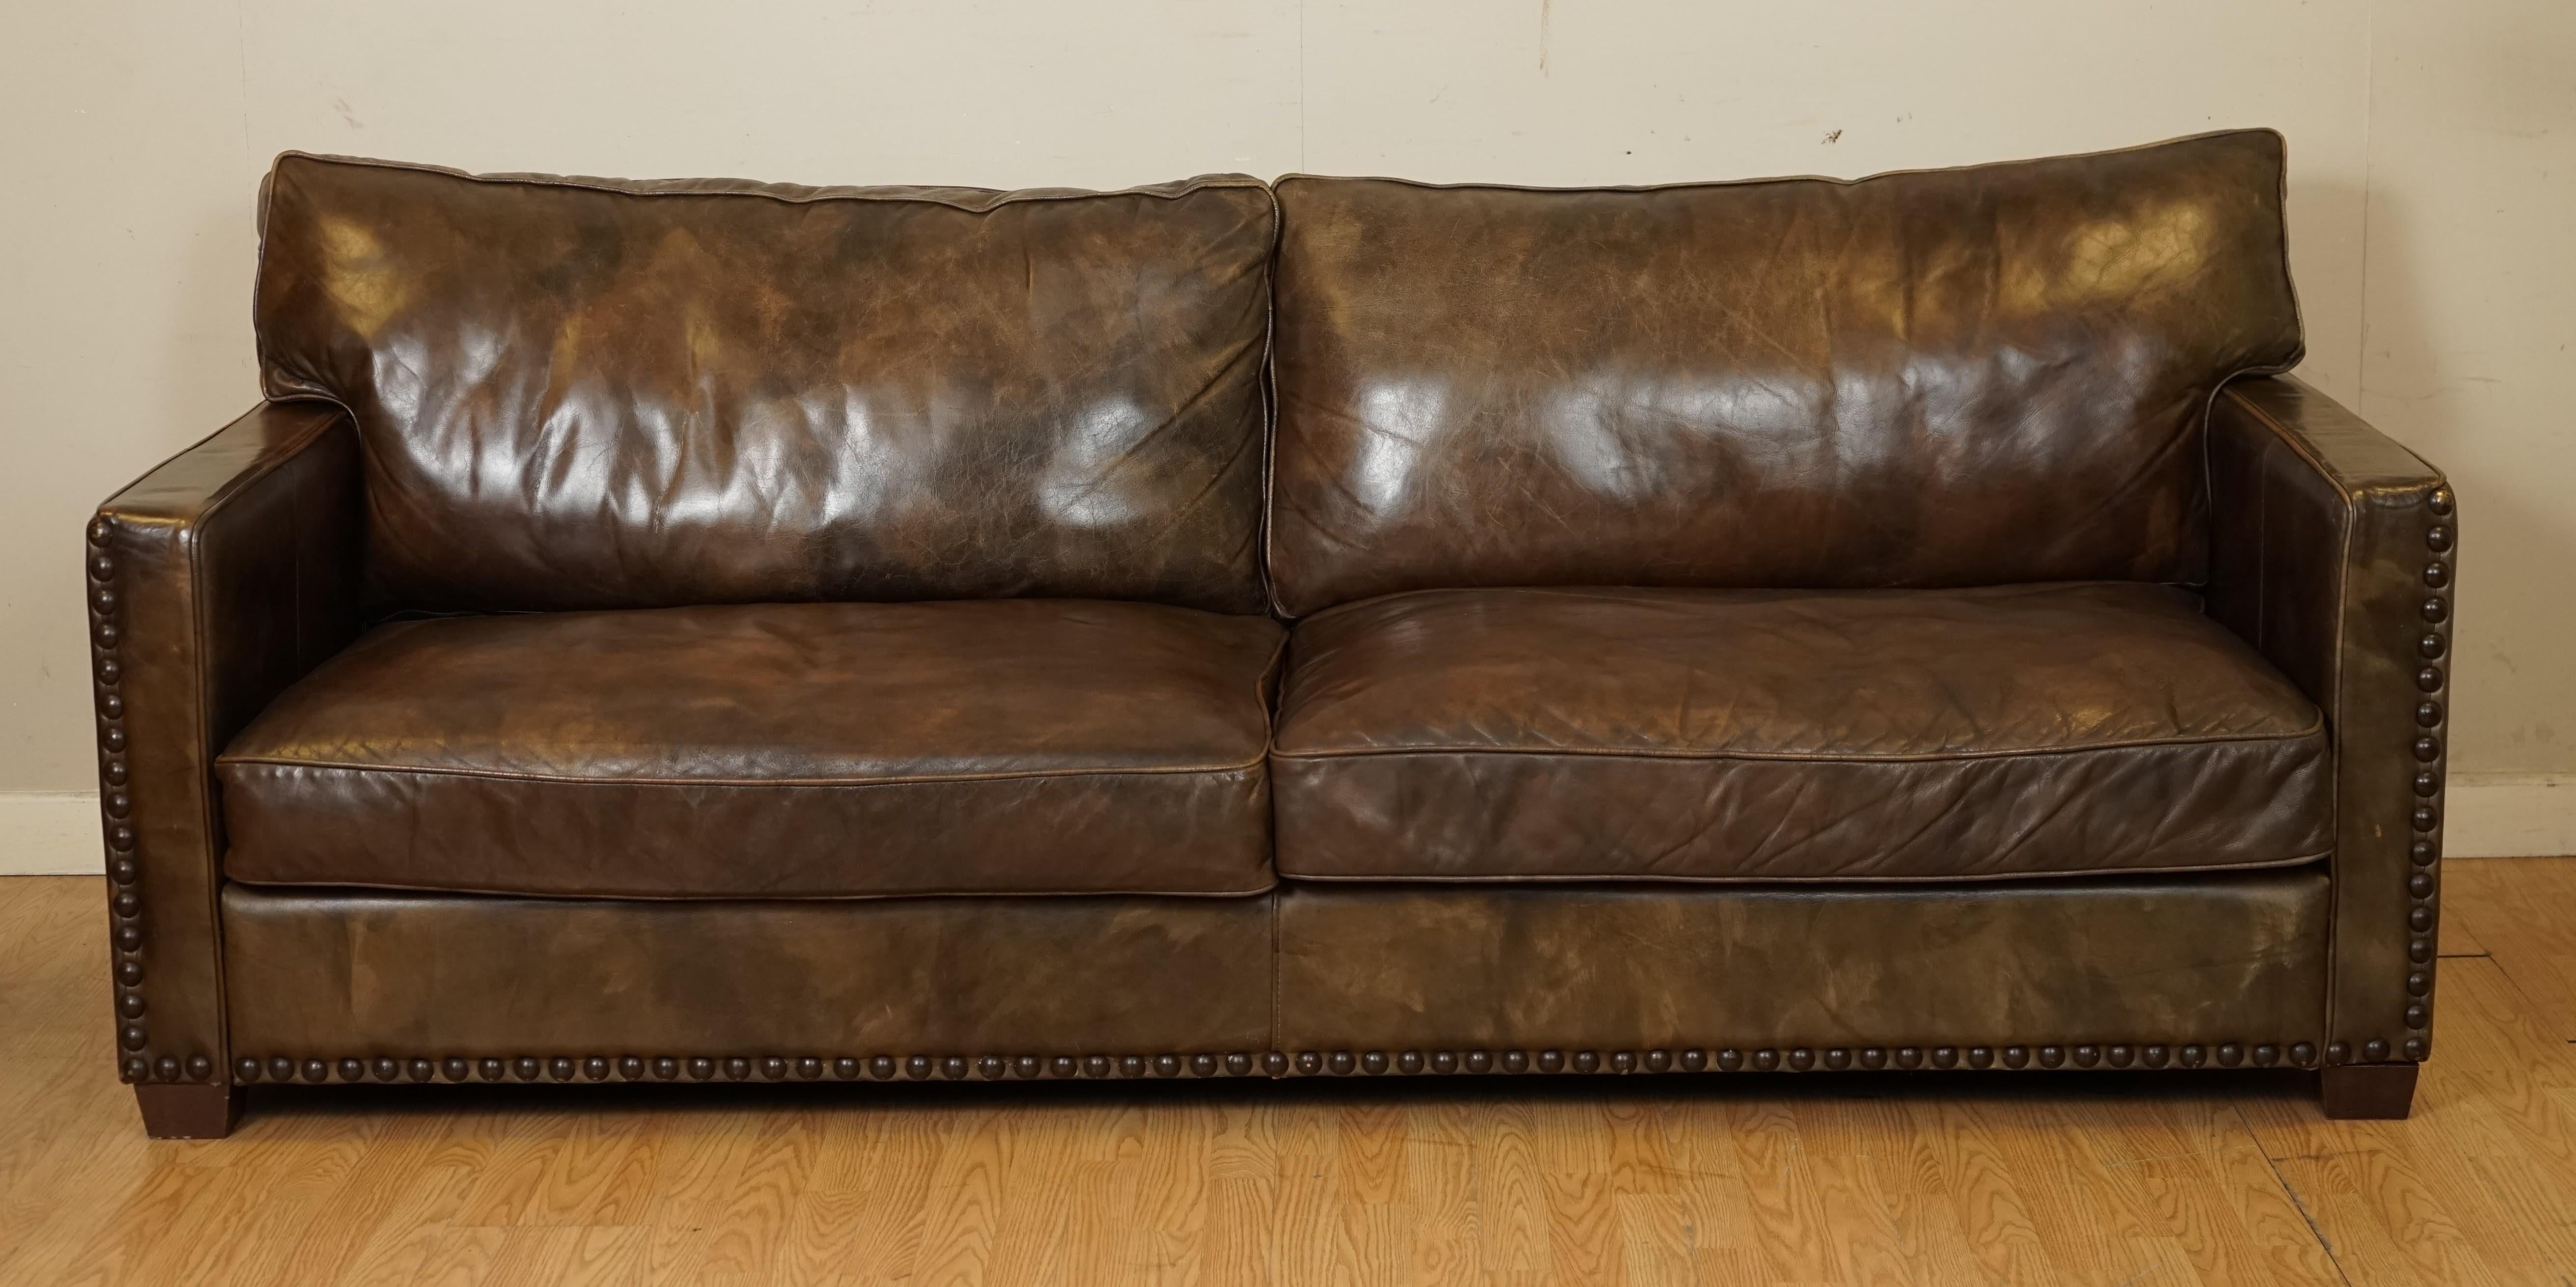 British Gorgeous Timothy Oulton Viscount Heritage Brown Leather 3/4 Seater Sofa